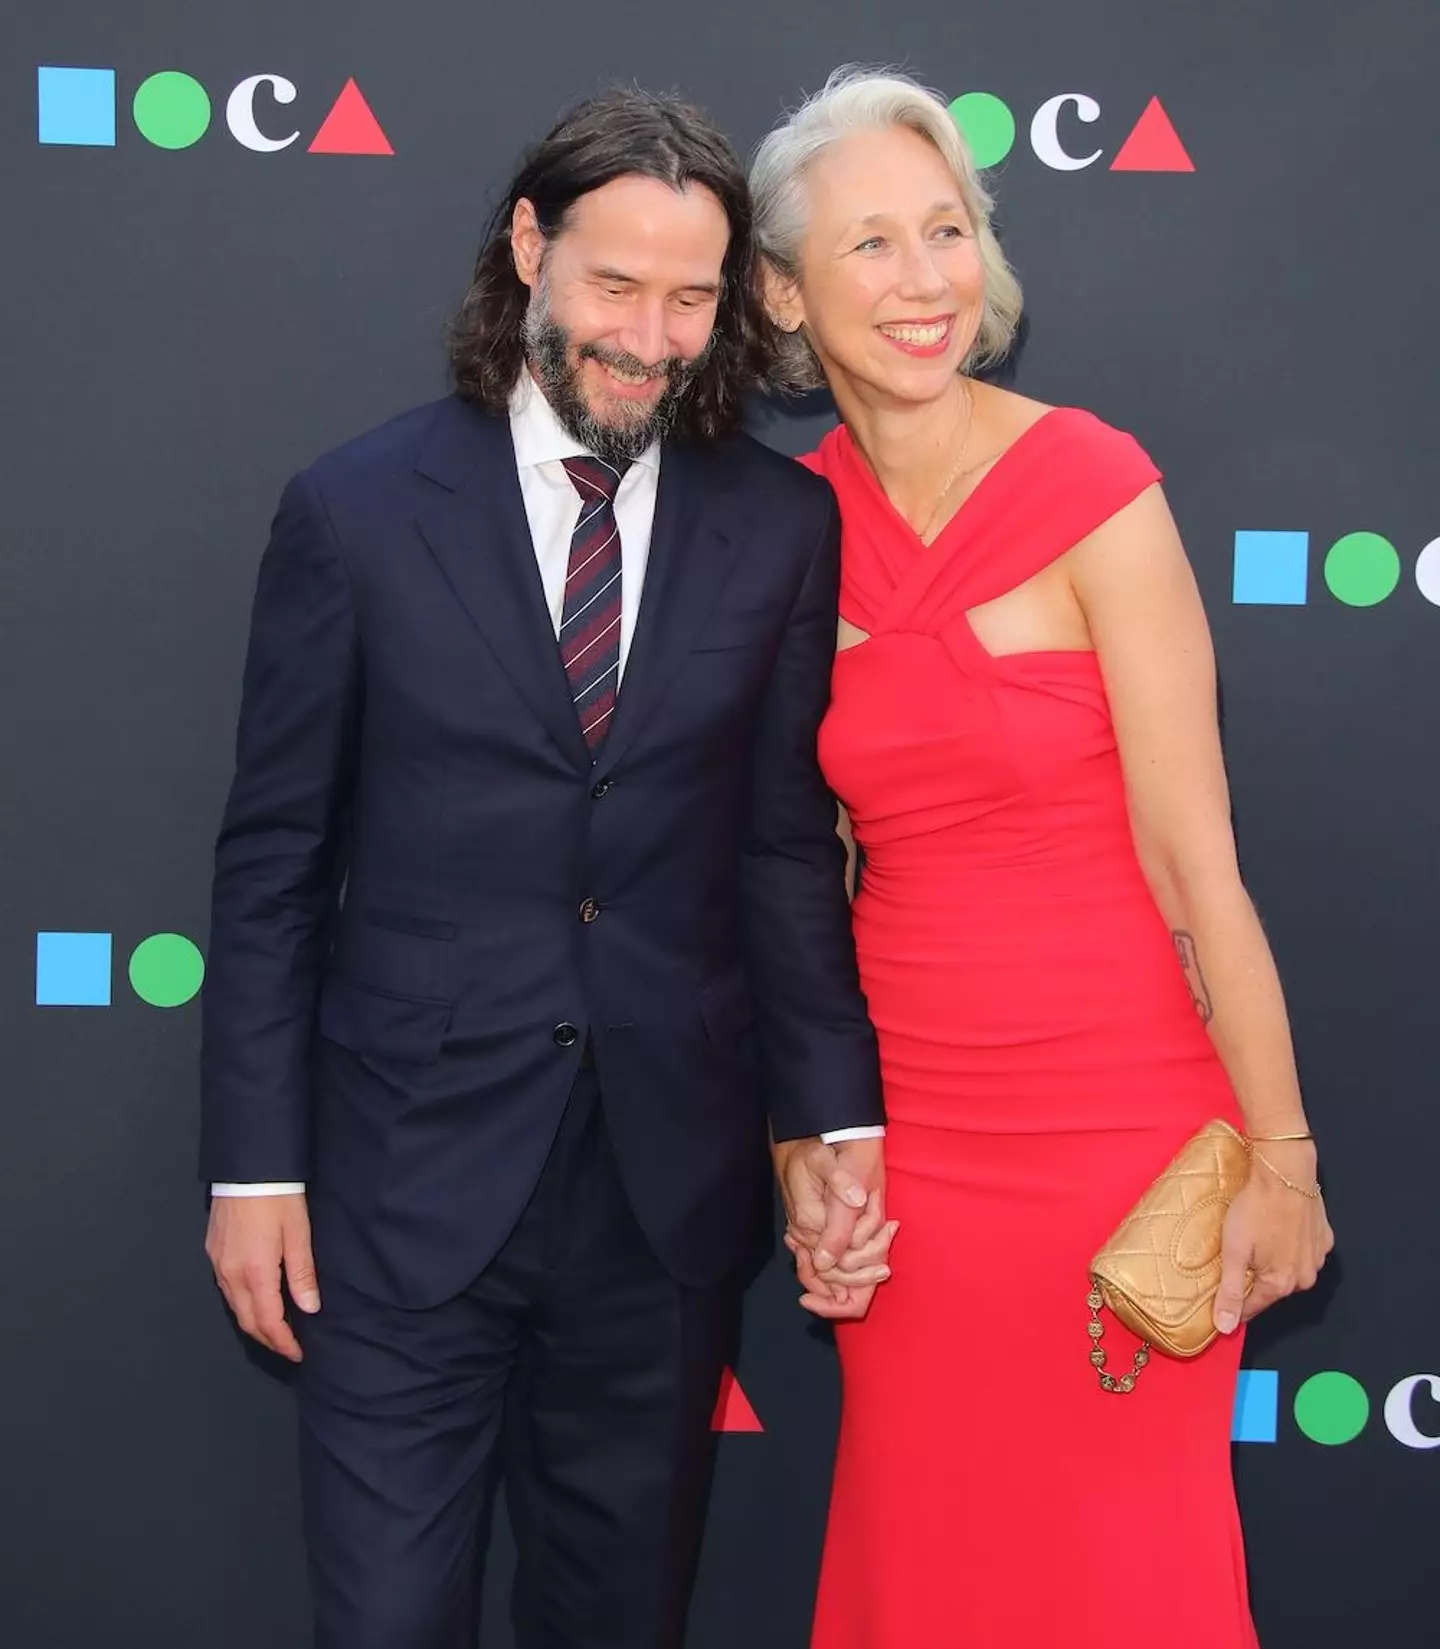 Keanu Reeves and Alexandra Grant went public with their relationship in 2019.